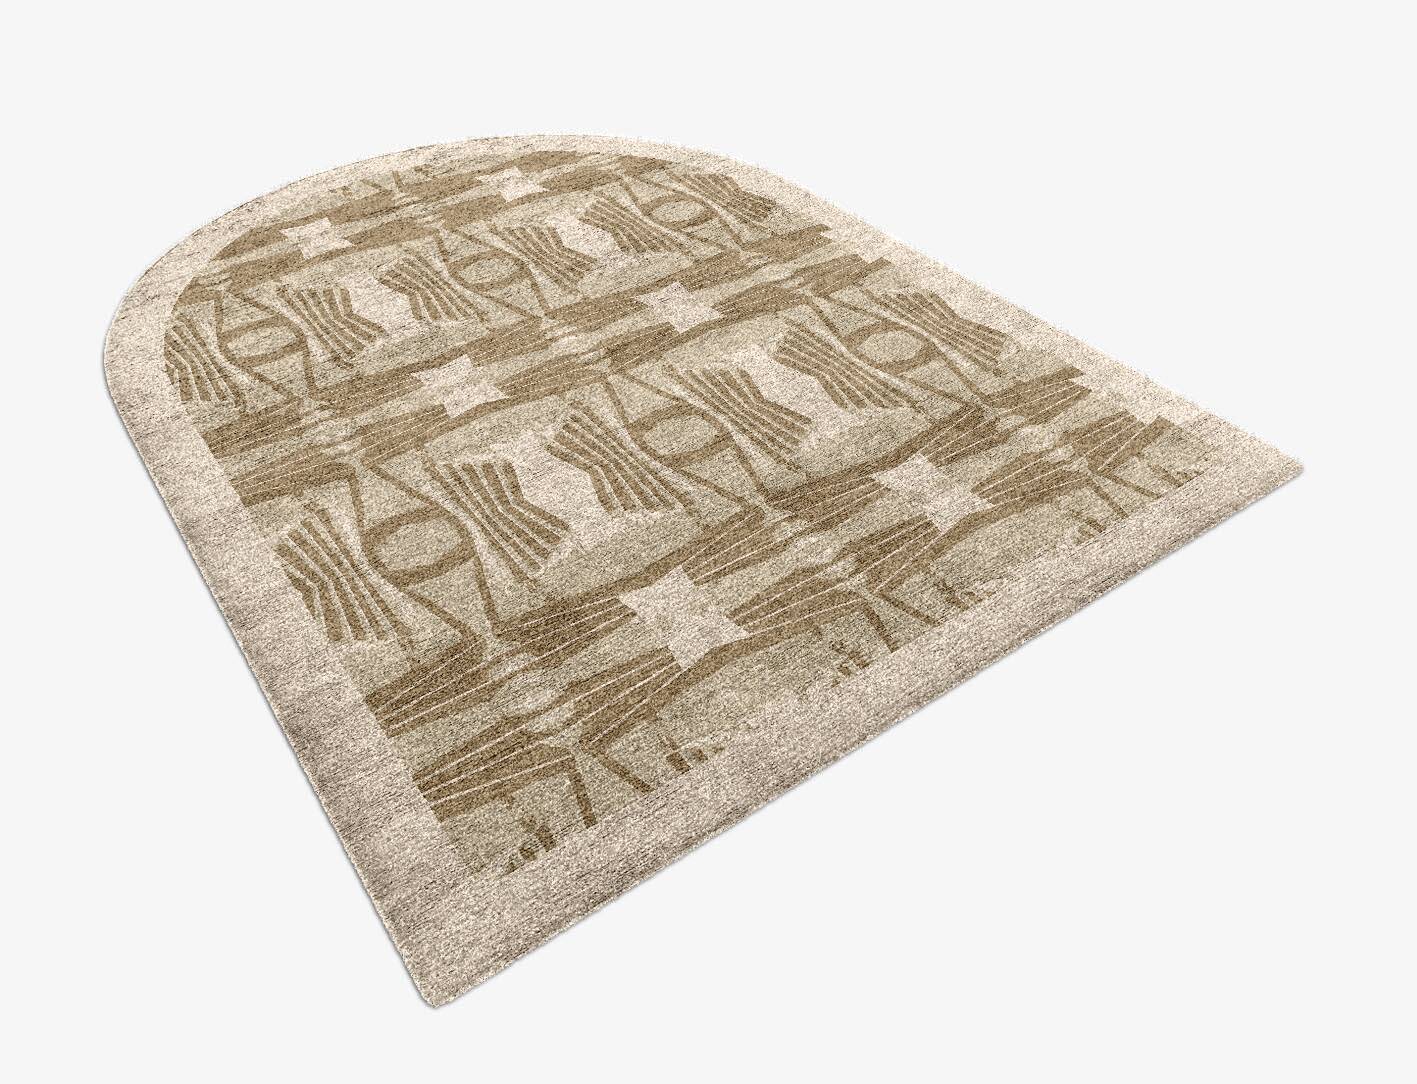 Simplicity Origami Arch Hand Knotted Bamboo Silk Custom Rug by Rug Artisan